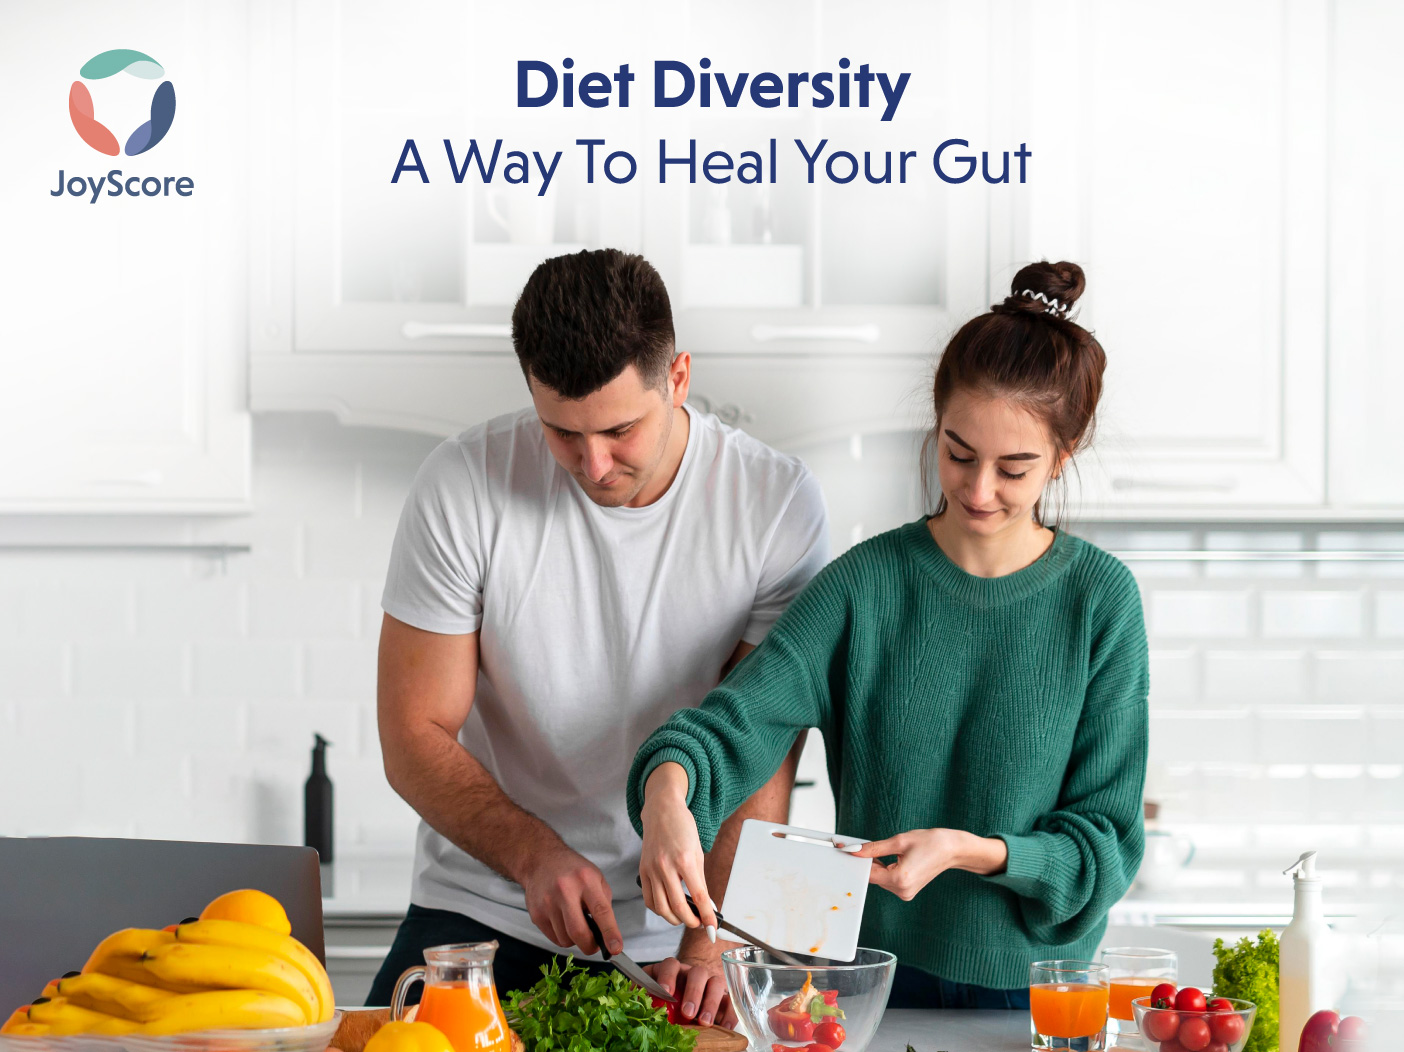 Diet Diversity – A Way to Heal Your Gut